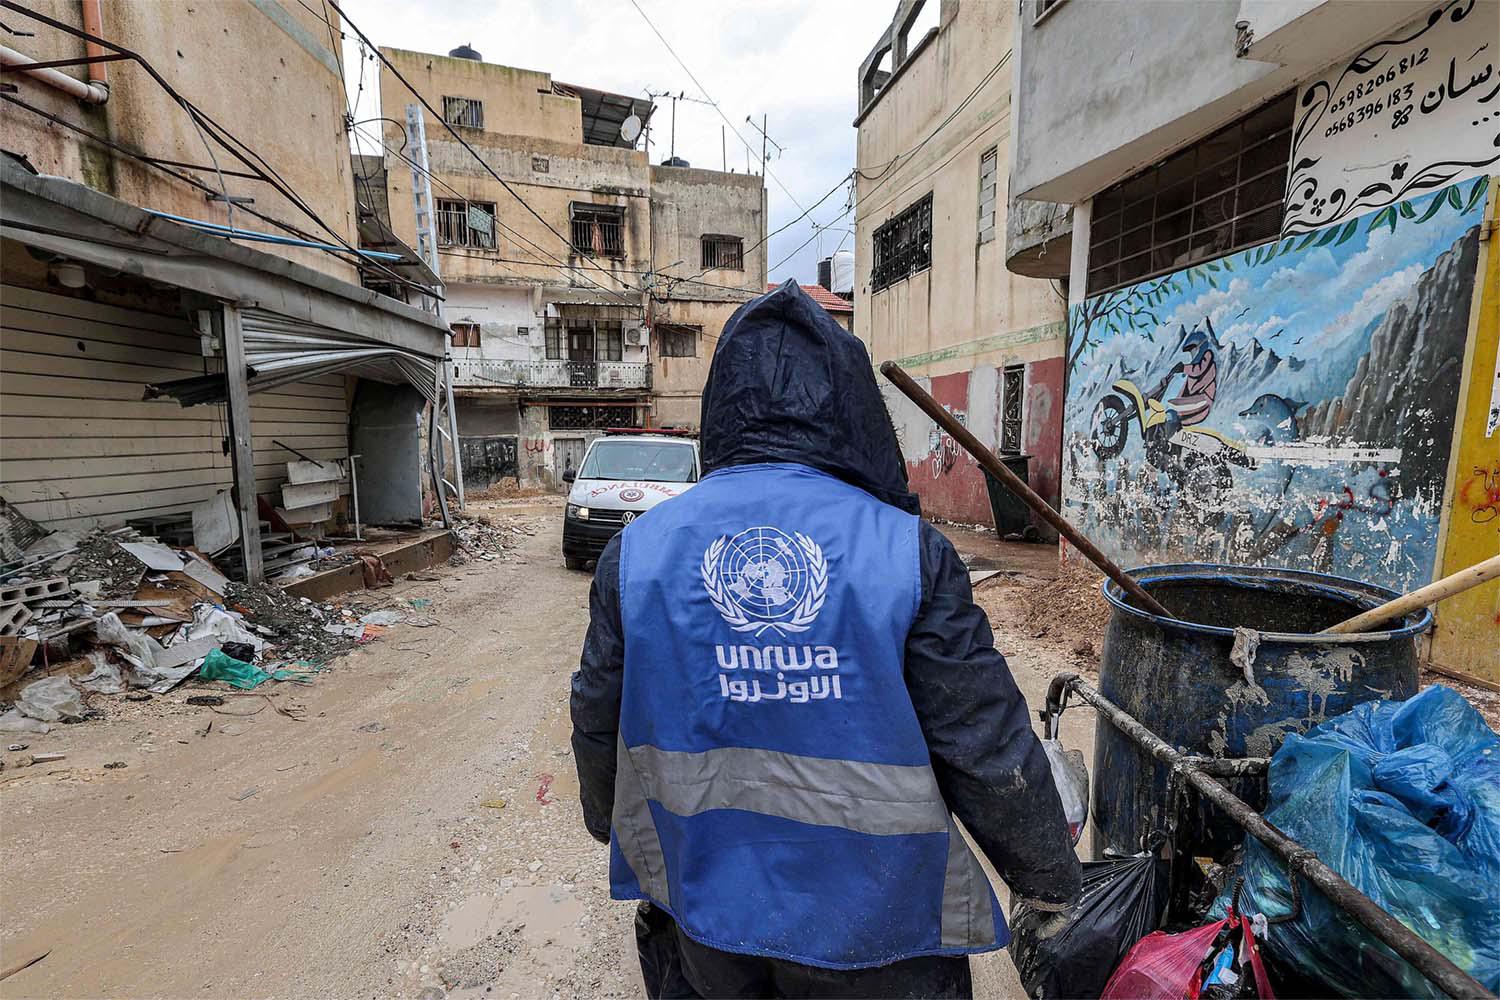 UNRWA employs 30,000 Palestinians to serve the civic and humanitarian needs in the occupied territories